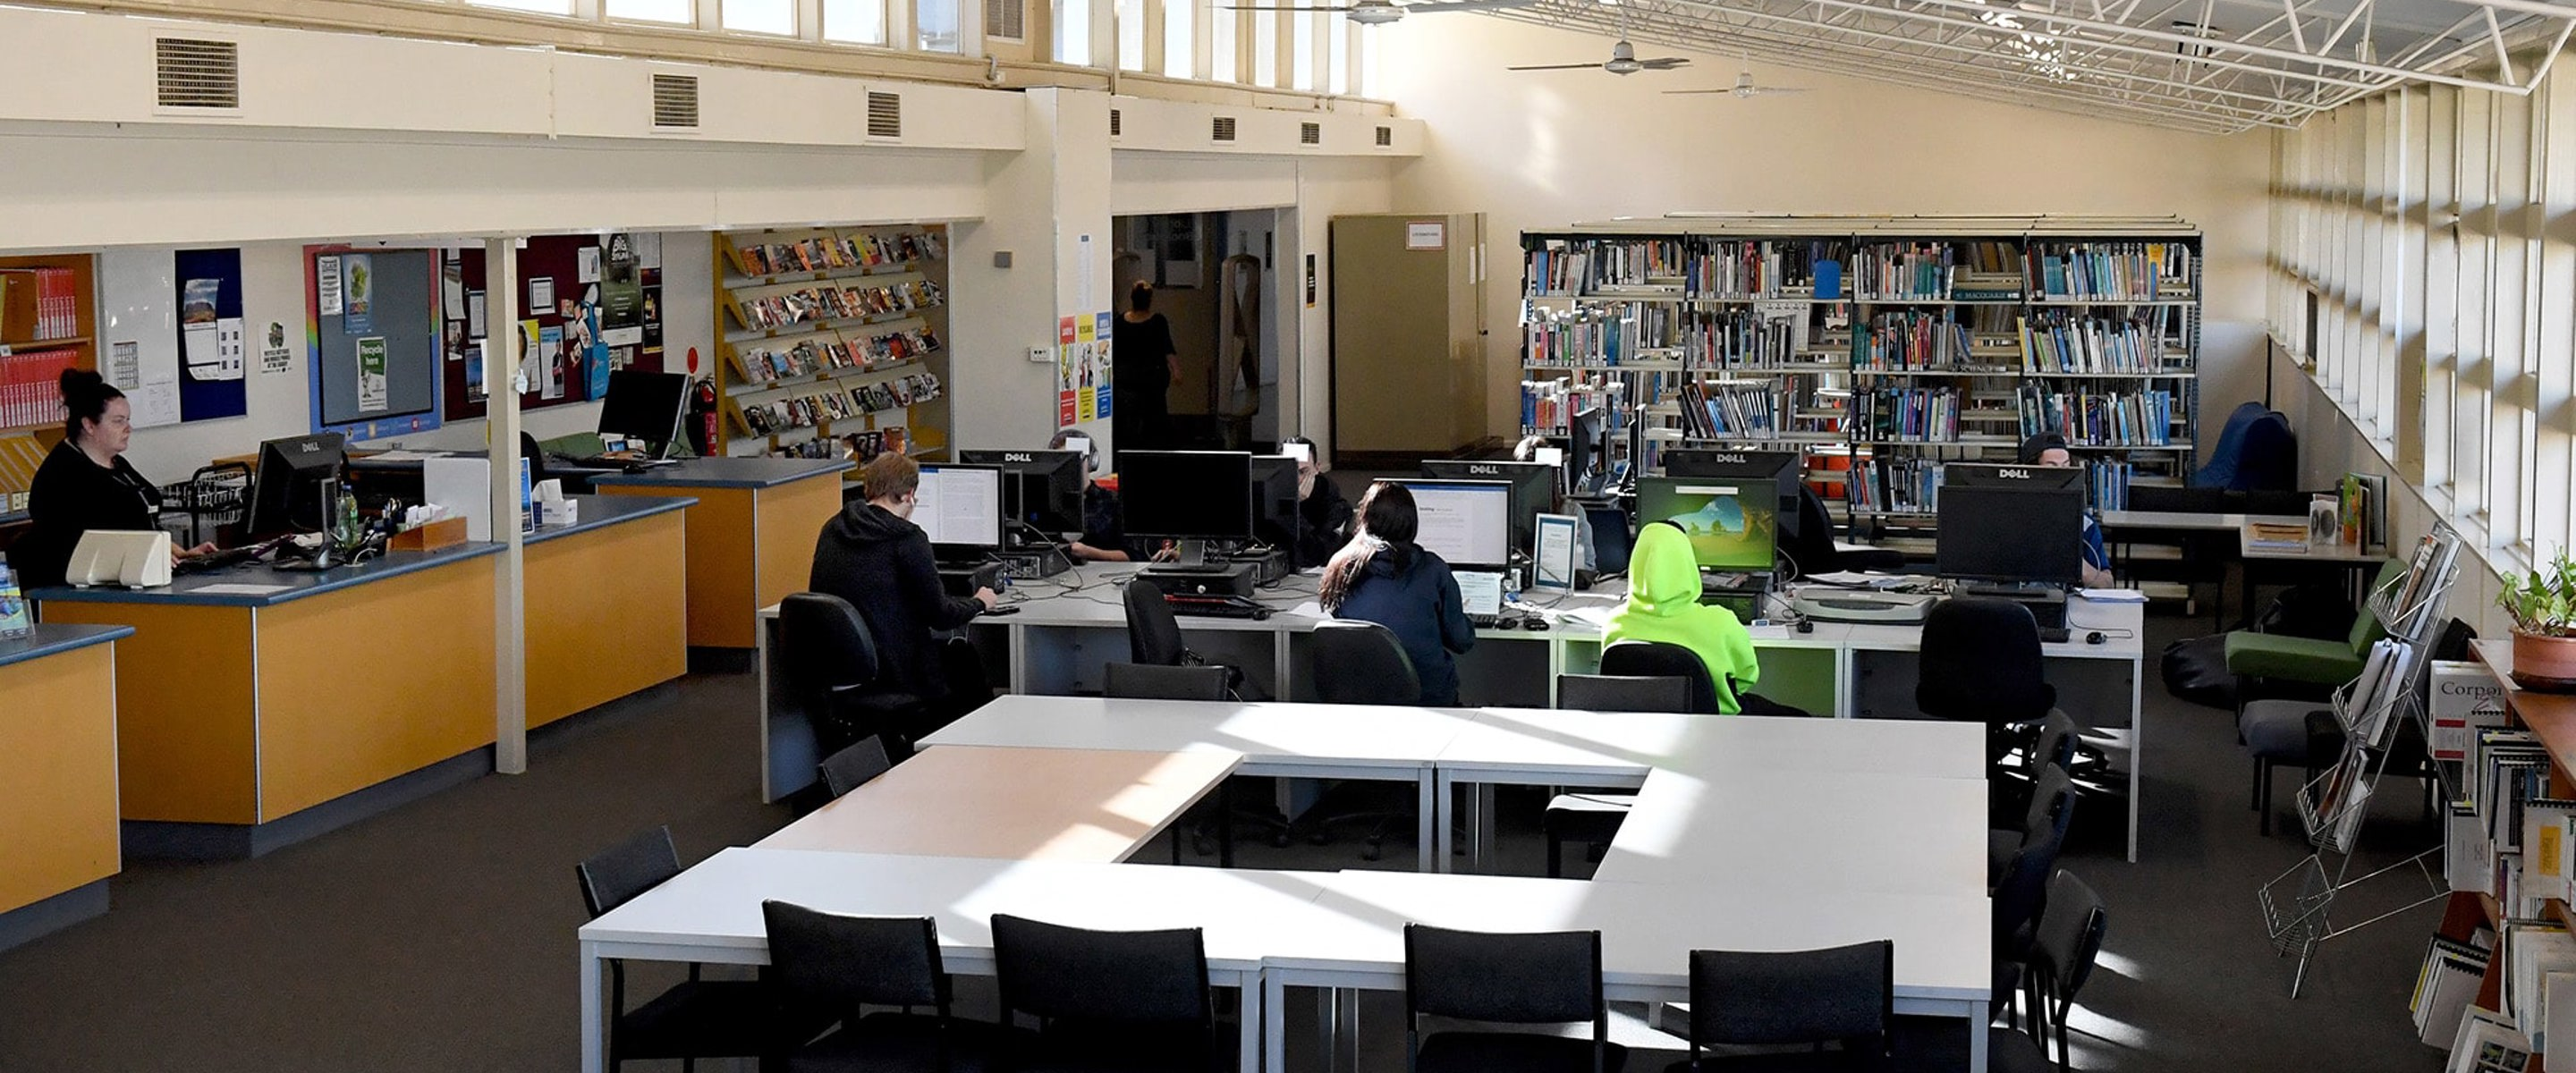 Students working in Melbourne Polytechnic's Heidelberg library